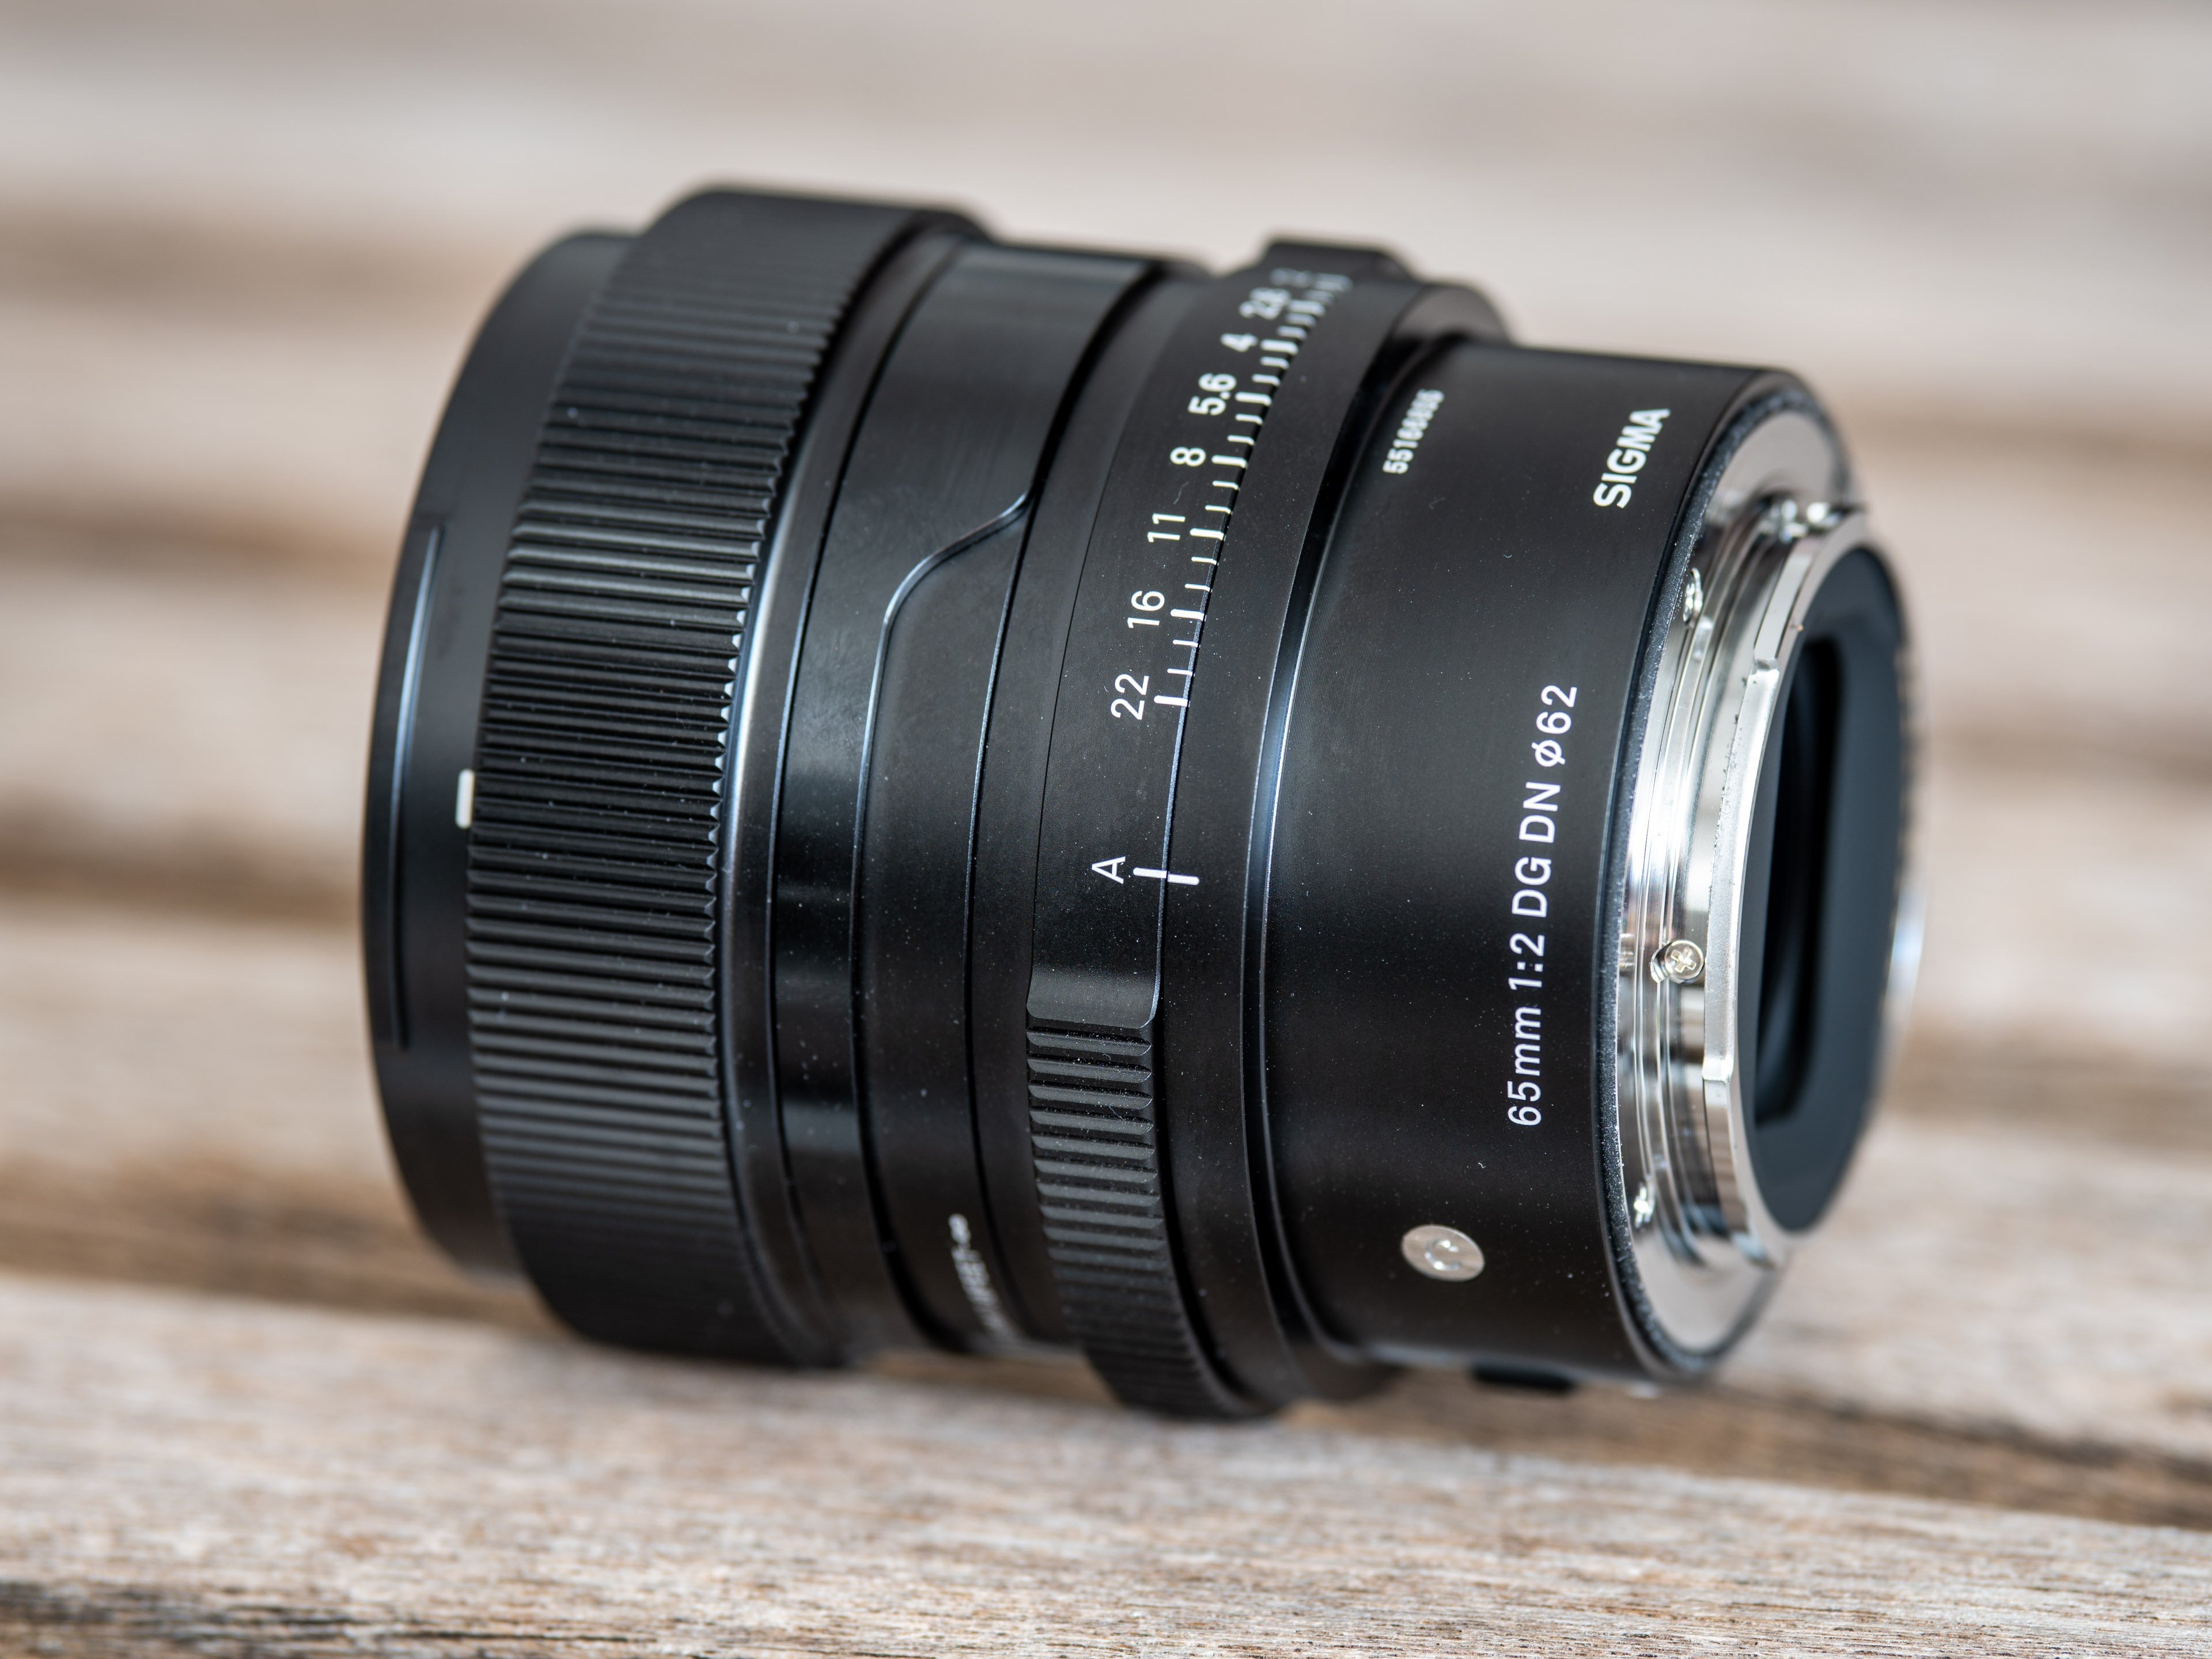 Sigma 65mm f2 DG DN review | Cameralabs